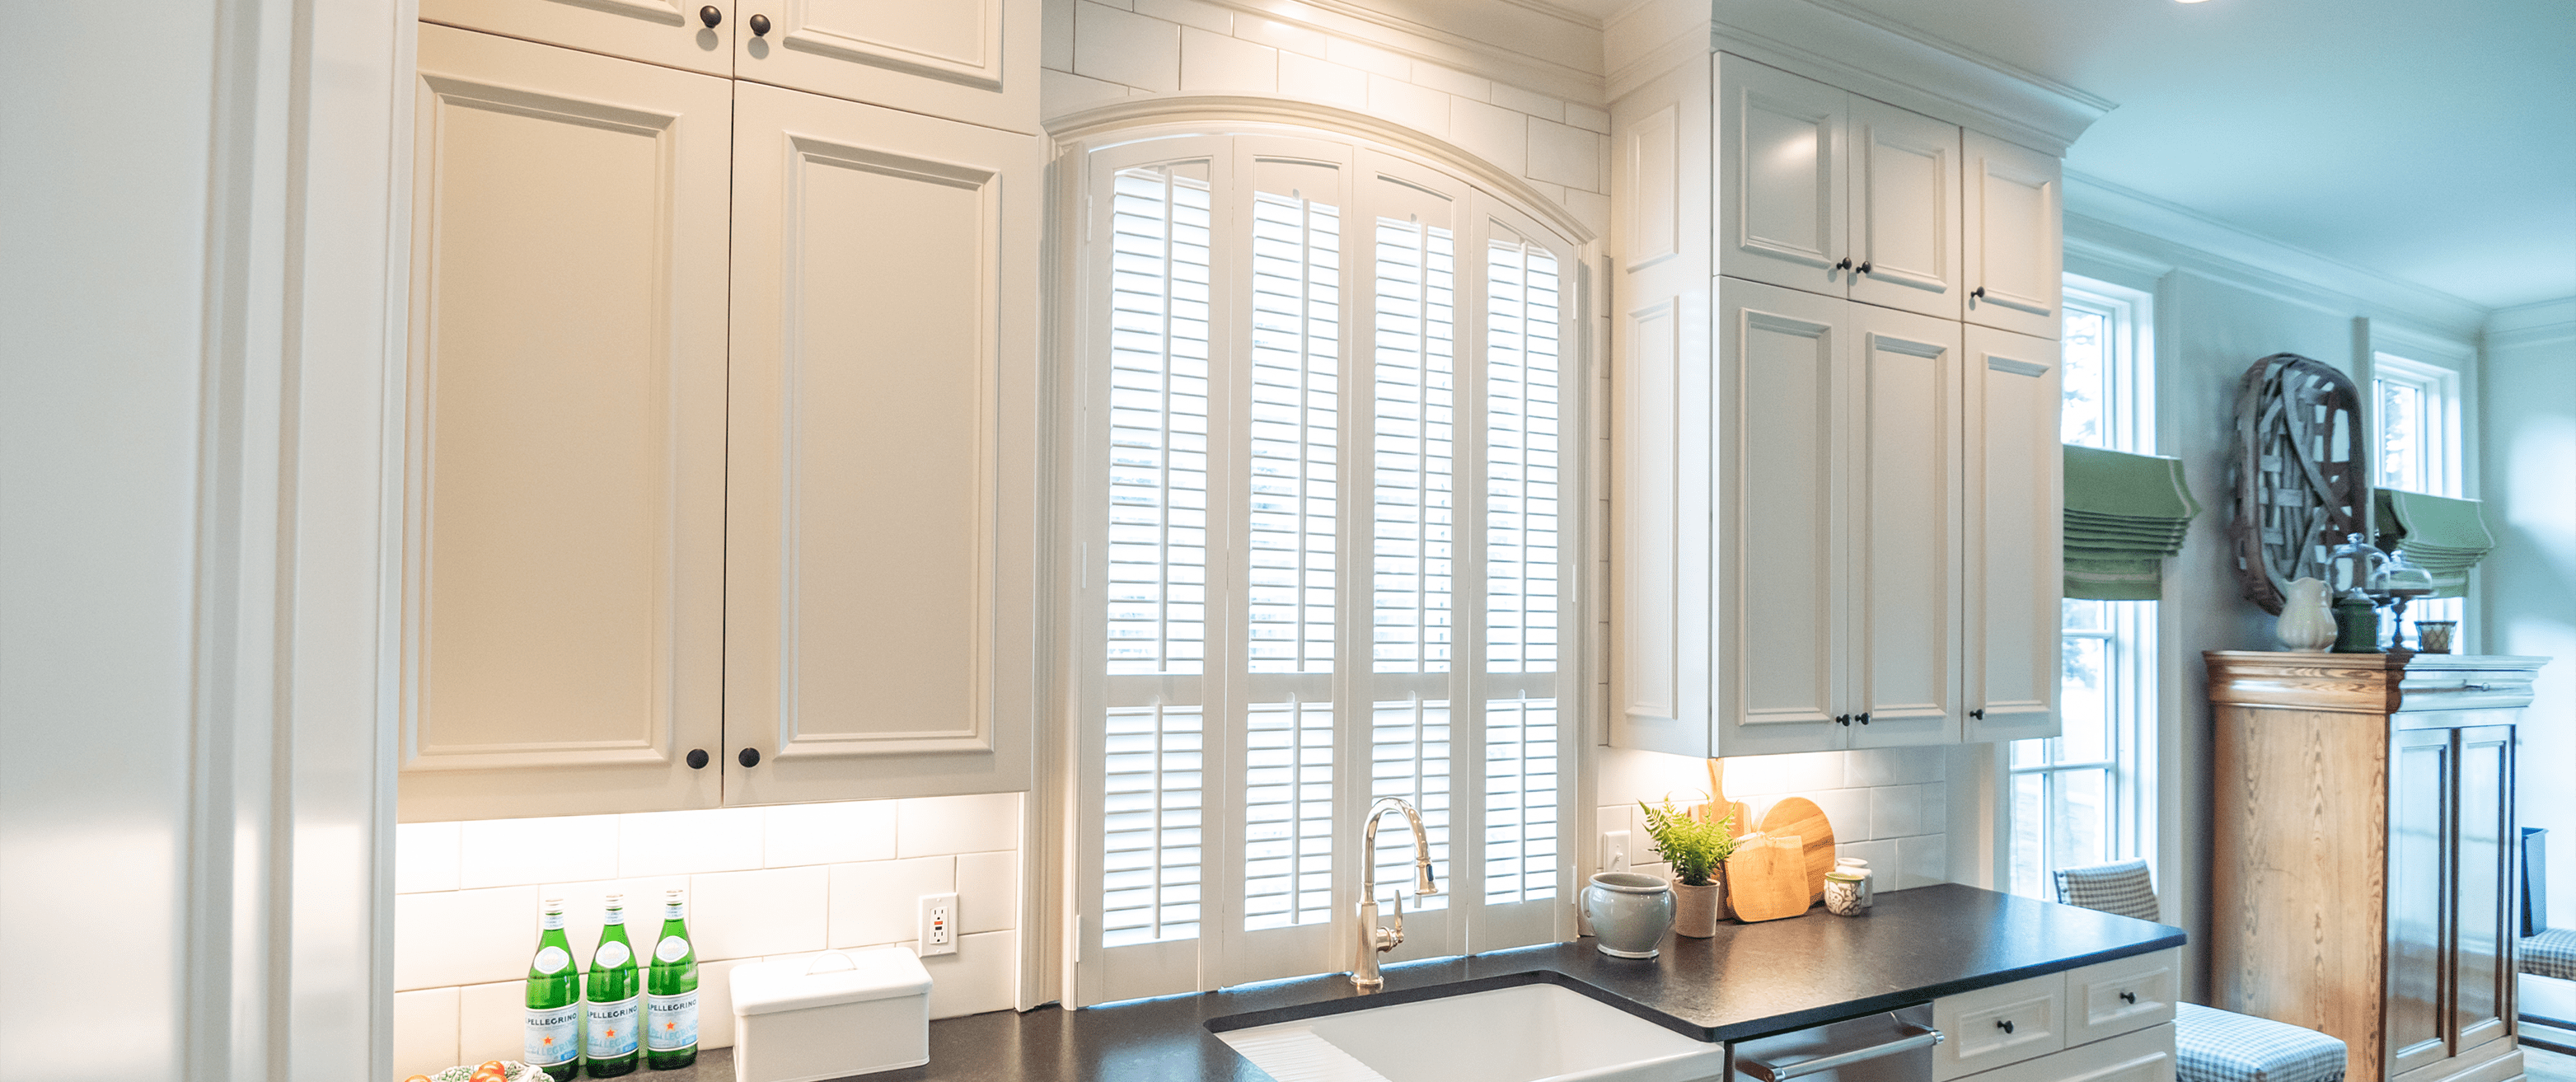 white moveable louvered interior kitchen shutters custom southern shutter home window treatment